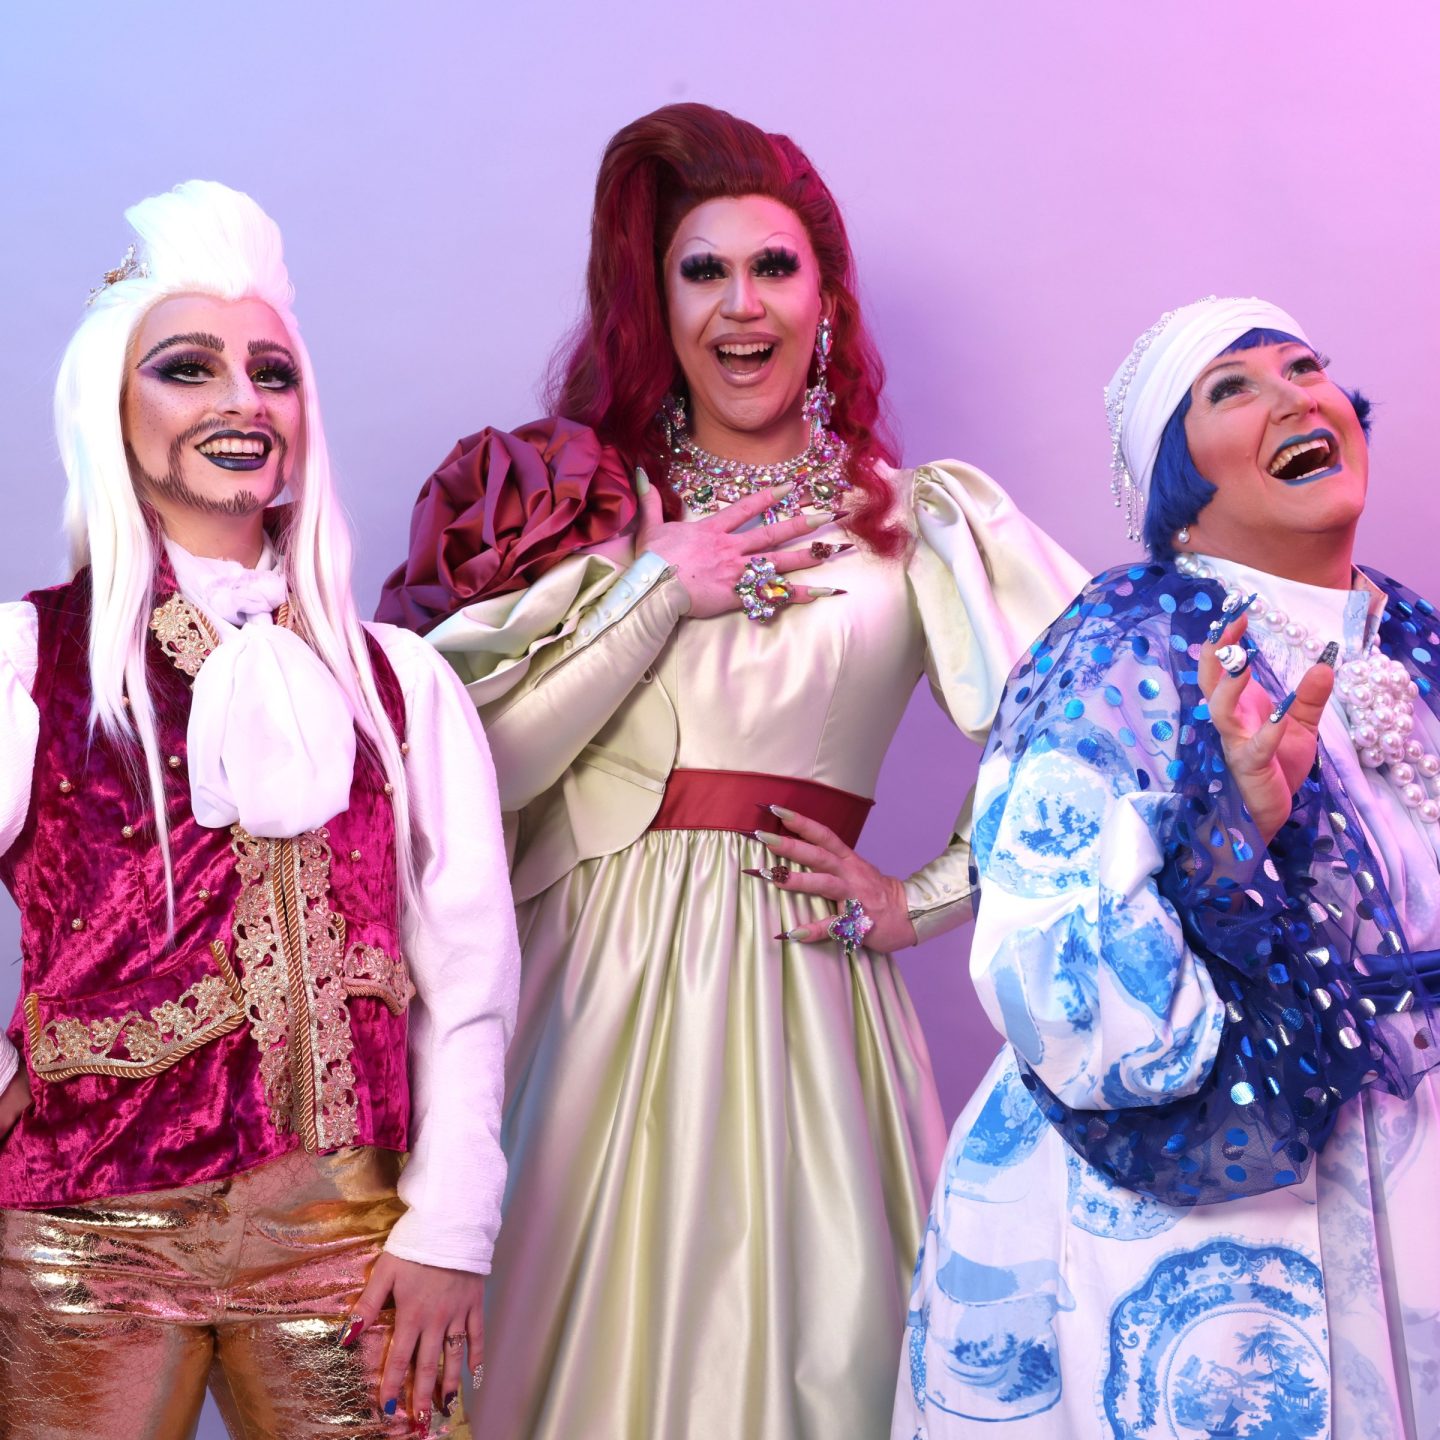 Three drag artists wearing re-imagined historical garments.